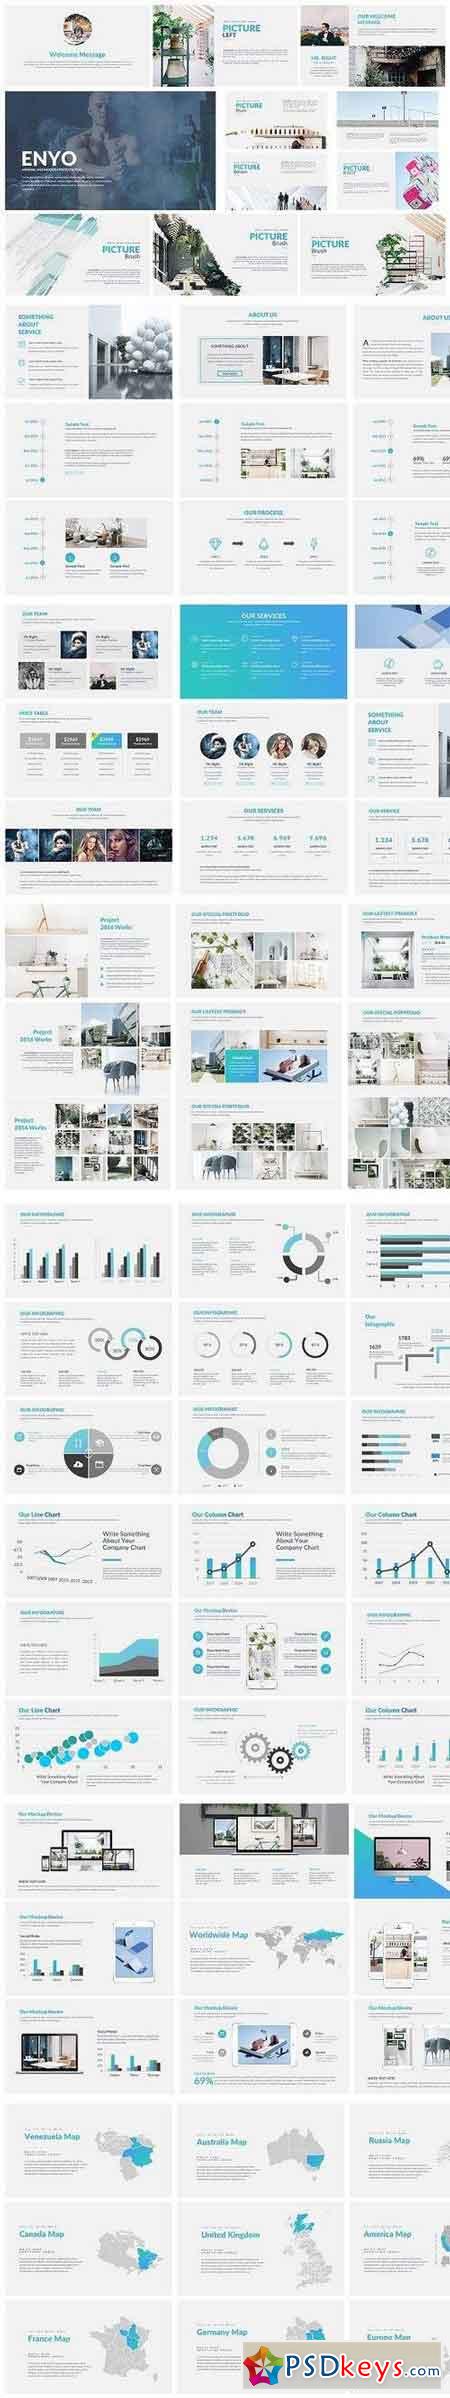 Enyo Creative Powerpoint Template 1154679